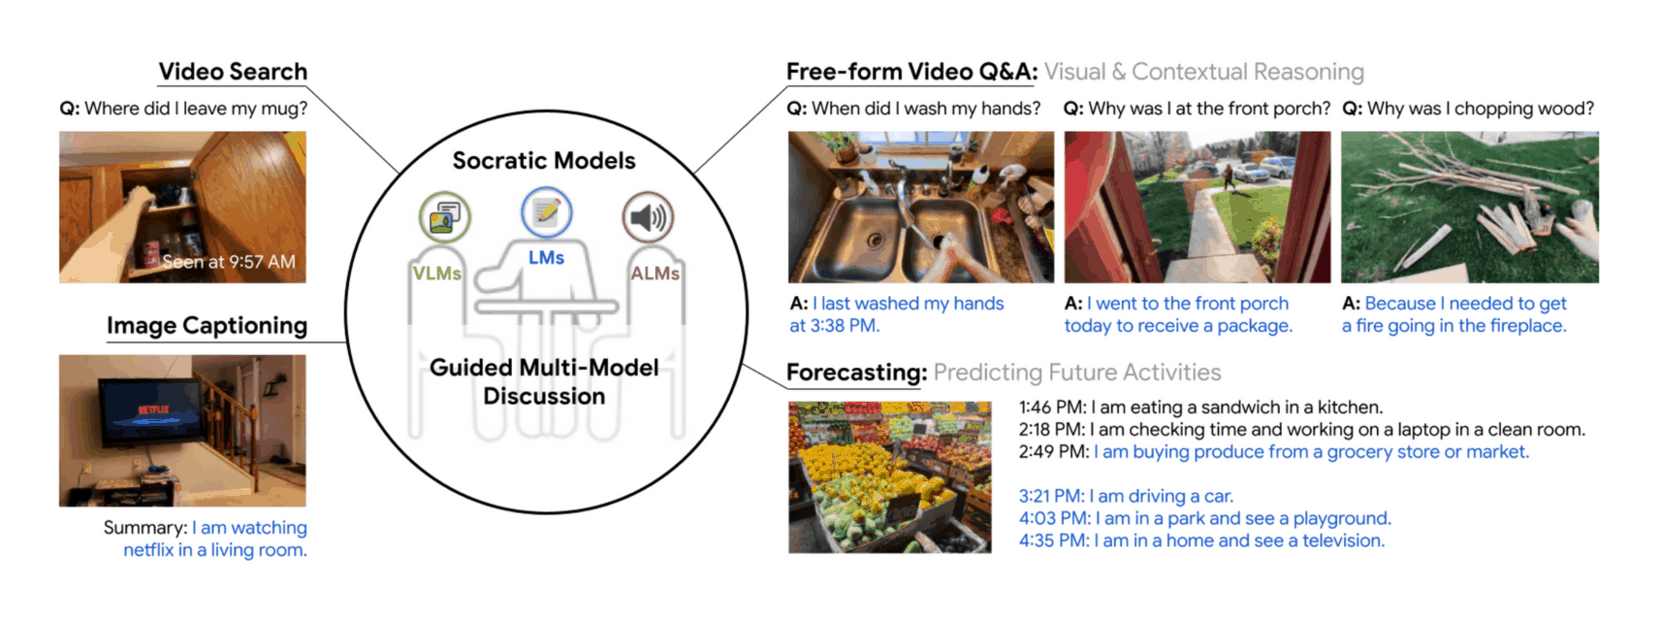 Figure 2: In this work we propose Socratic Models (SMs), a framework that uses structured dialogue between pre-existing foundation models, each of which can exhibit unique (but complementary) capabilities depending on the distributions of data on which they are trained. On various perceptual tasks (shown), this work presents a case study of SMs with visual language models (VLMs, eg. CLIP), large language models (LMs, eg. GPT-3, RoBERTa), and audio language models (ALMs, eg. Wav2CLIP, Speech2Text). From video search, to image captioning; from generating free-form answers to contextual reasoning questions, to forecasting future activities—SMs can provide meaningful results for complex tasks across classically challenging computer vision domains, without any model finetuning.